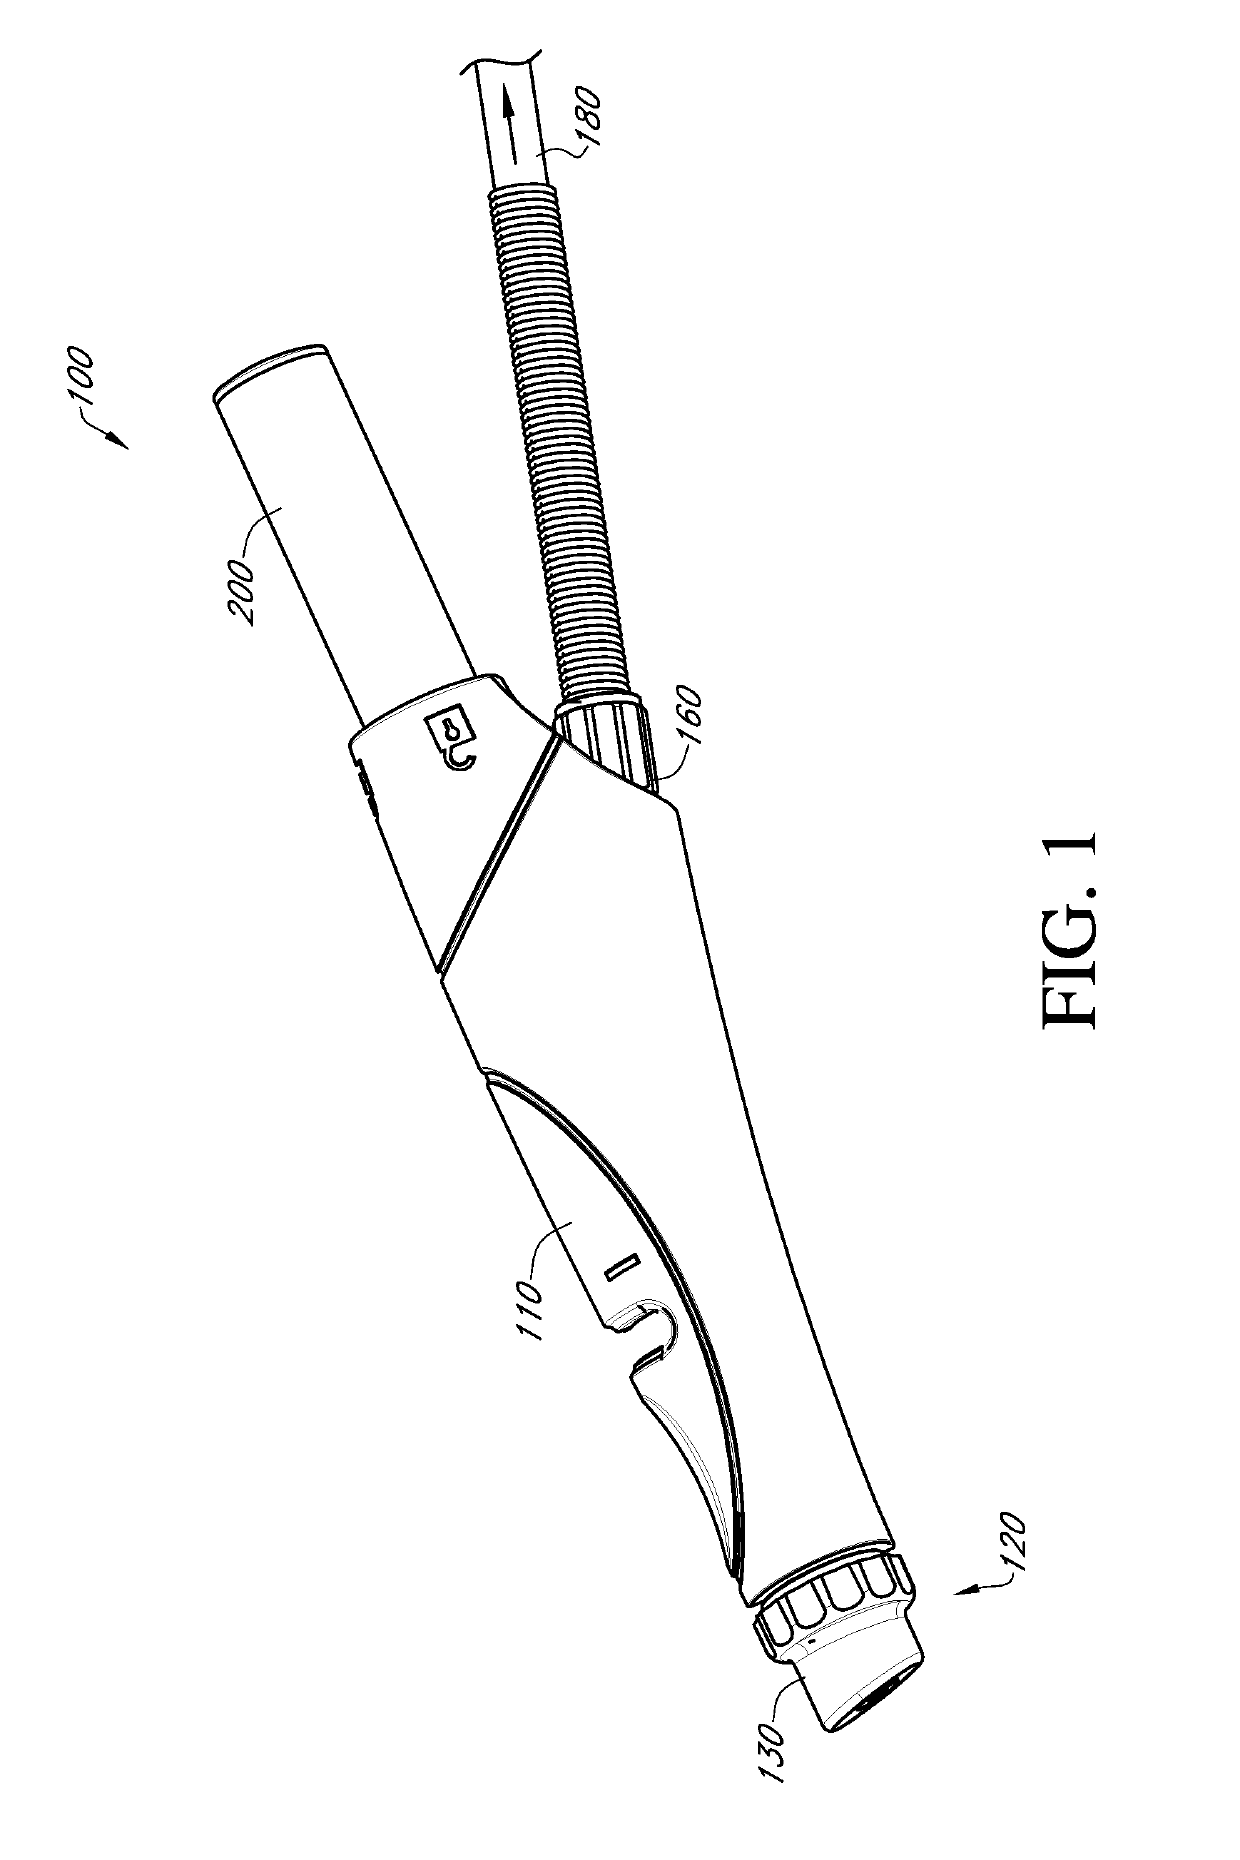 Devices, systems and methods for treating the skin